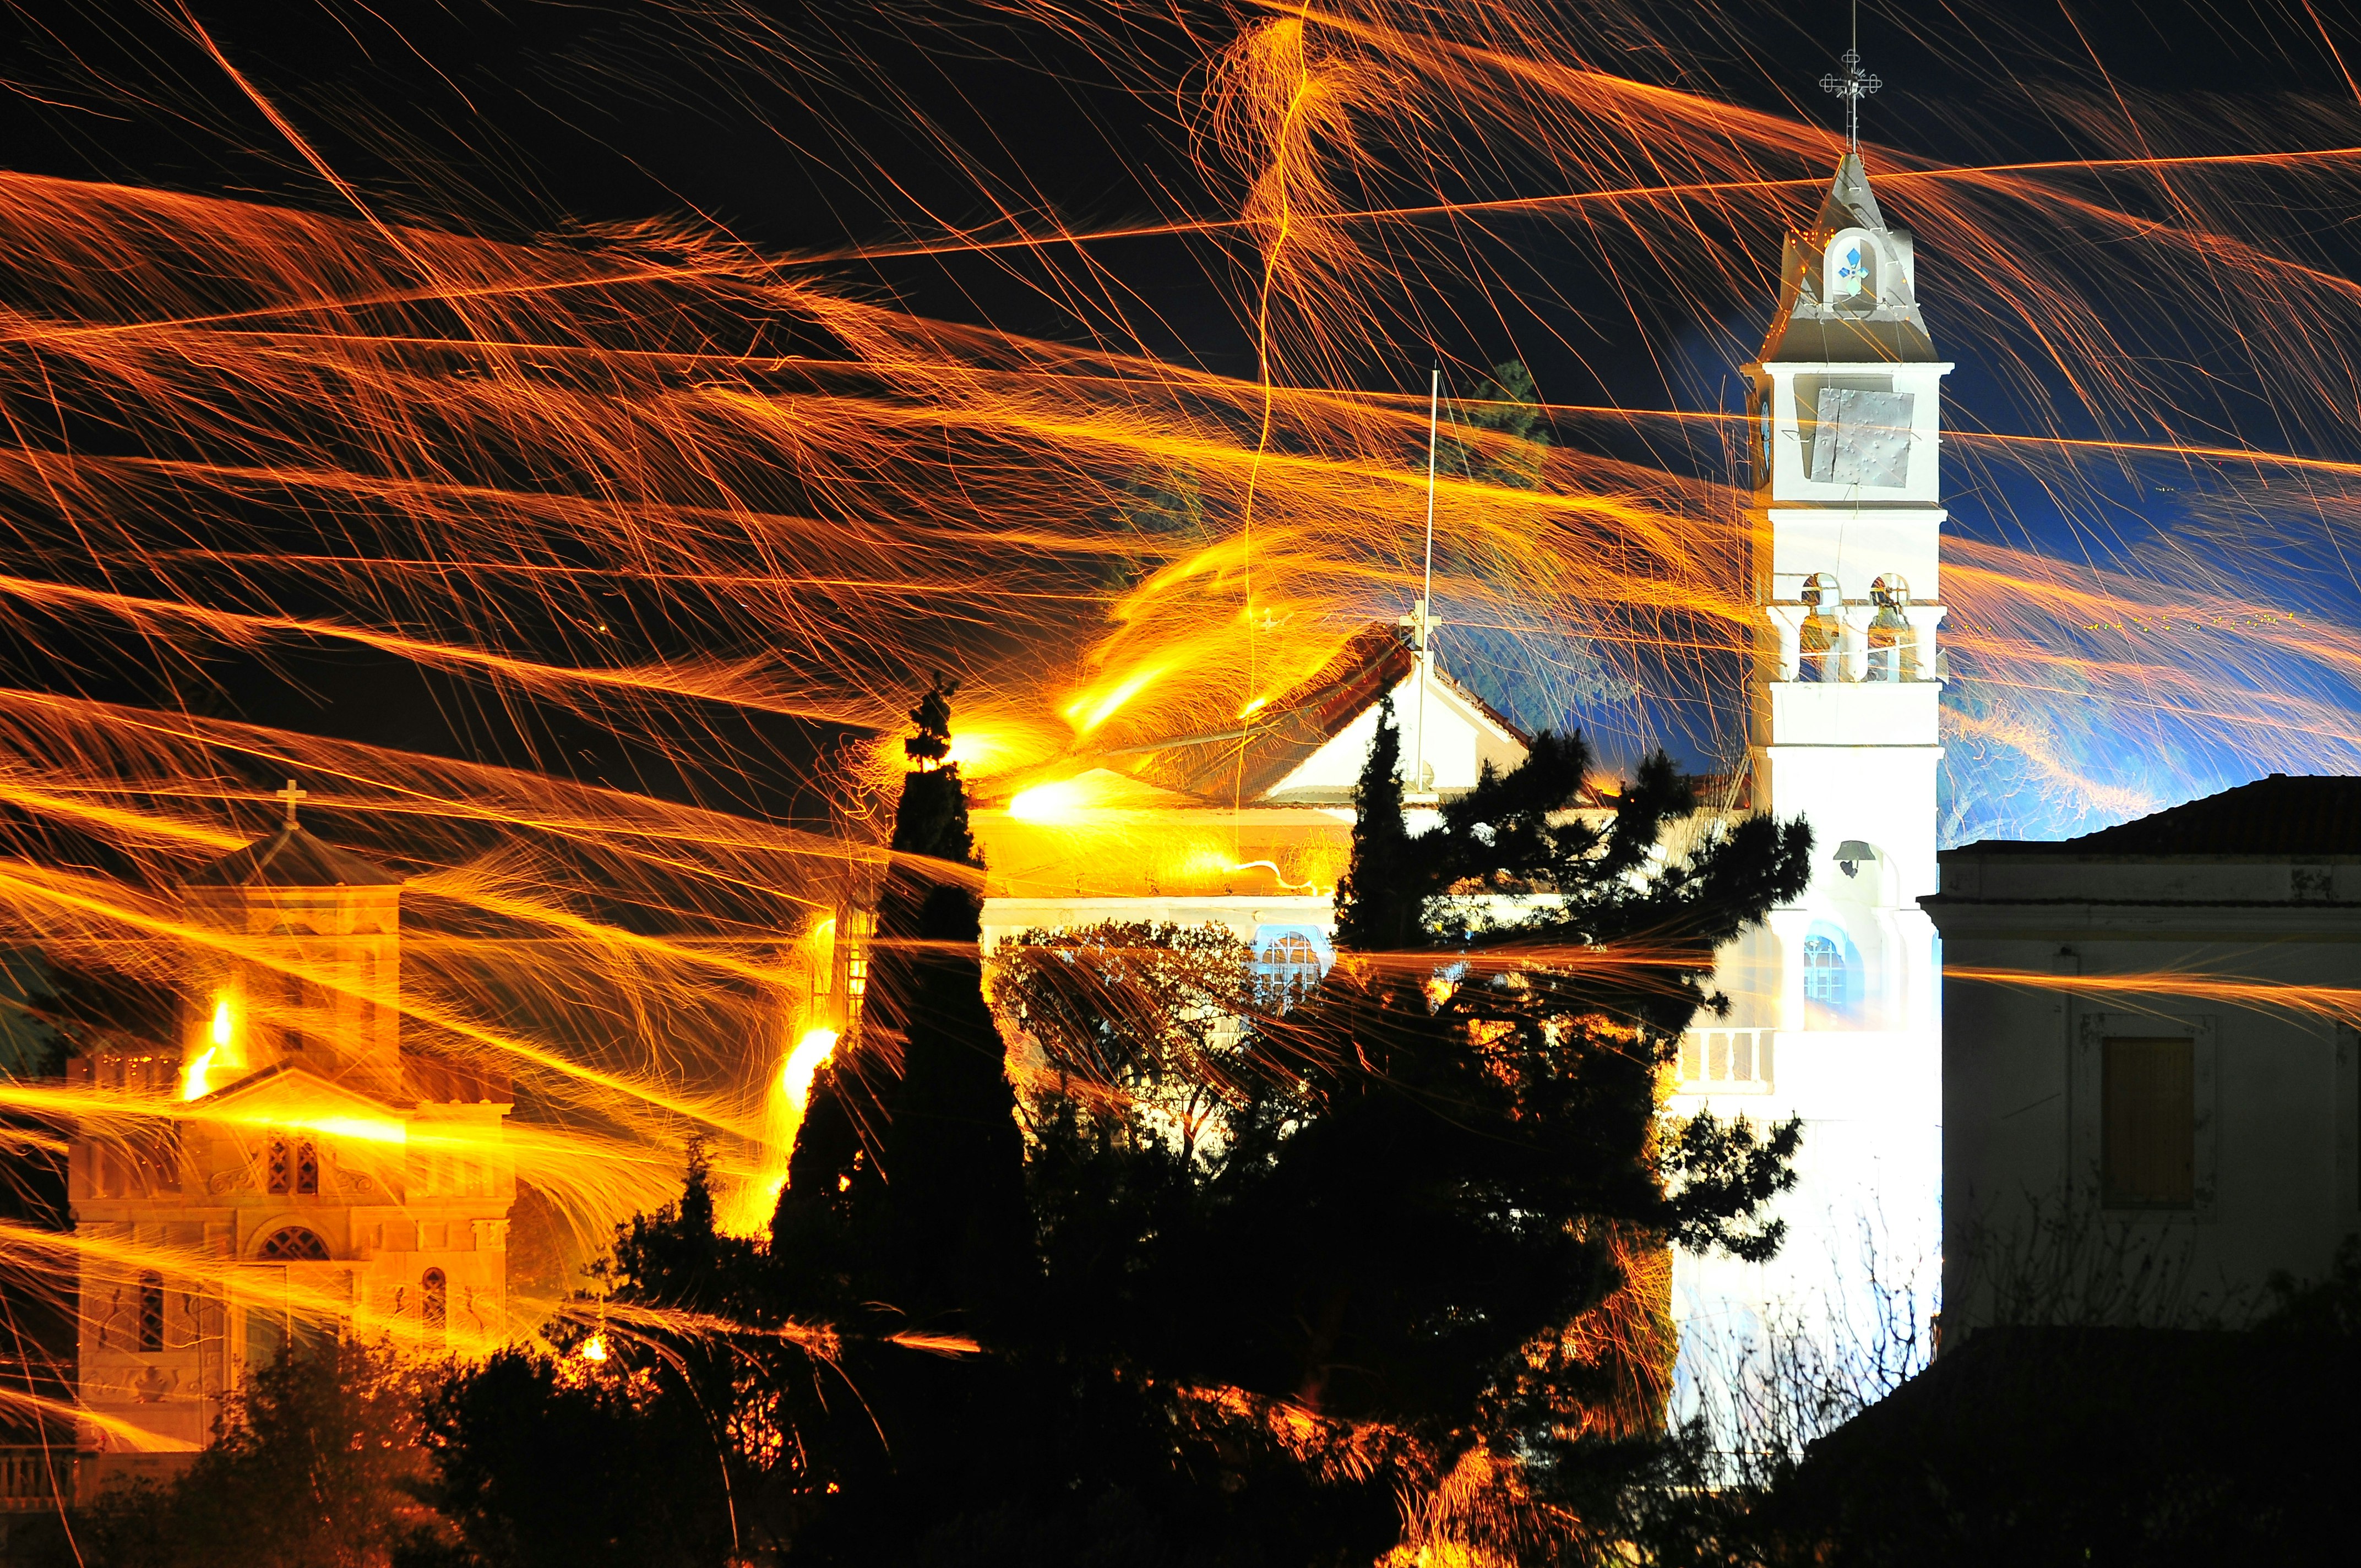 A night-time long-exposure shot showing the glowing paths of rockets attacking a church during 'rouketopolemos' on the island of Chios, Greece.